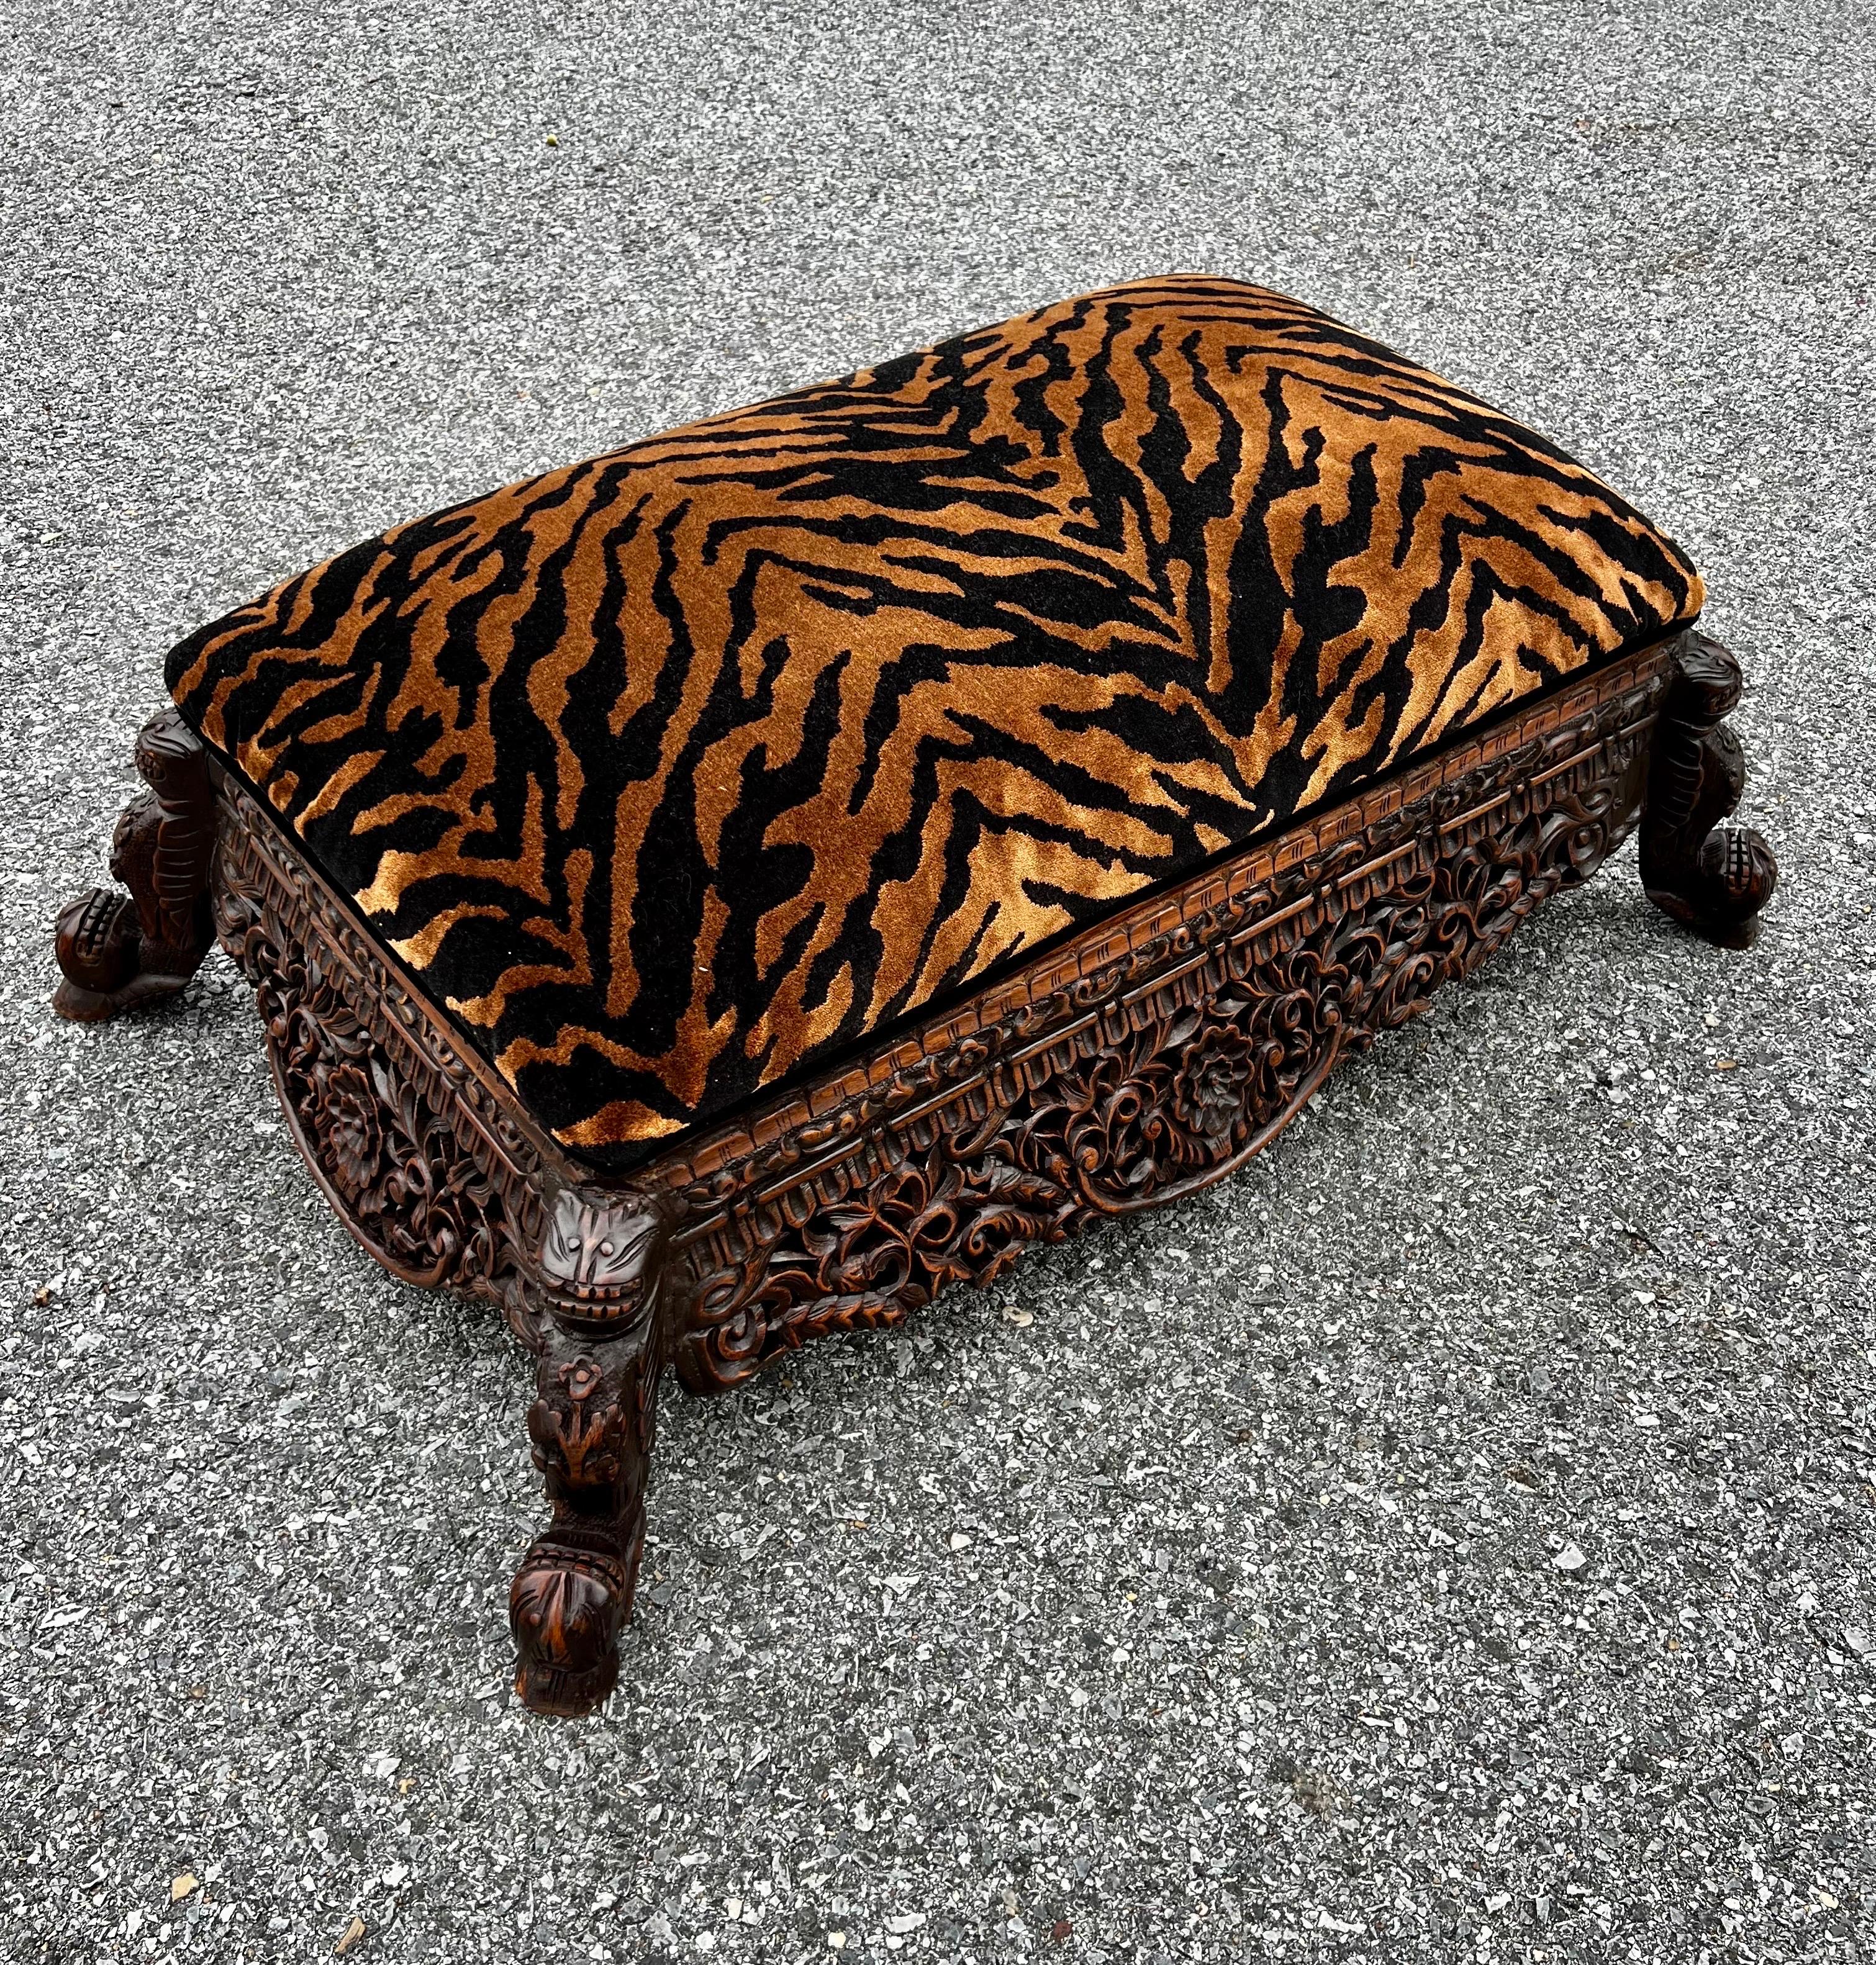 Refinished Late 19th Century Anglo-Indian Heavily Carved Tiger Velvet Ottoman  (19. Jahrhundert) im Angebot